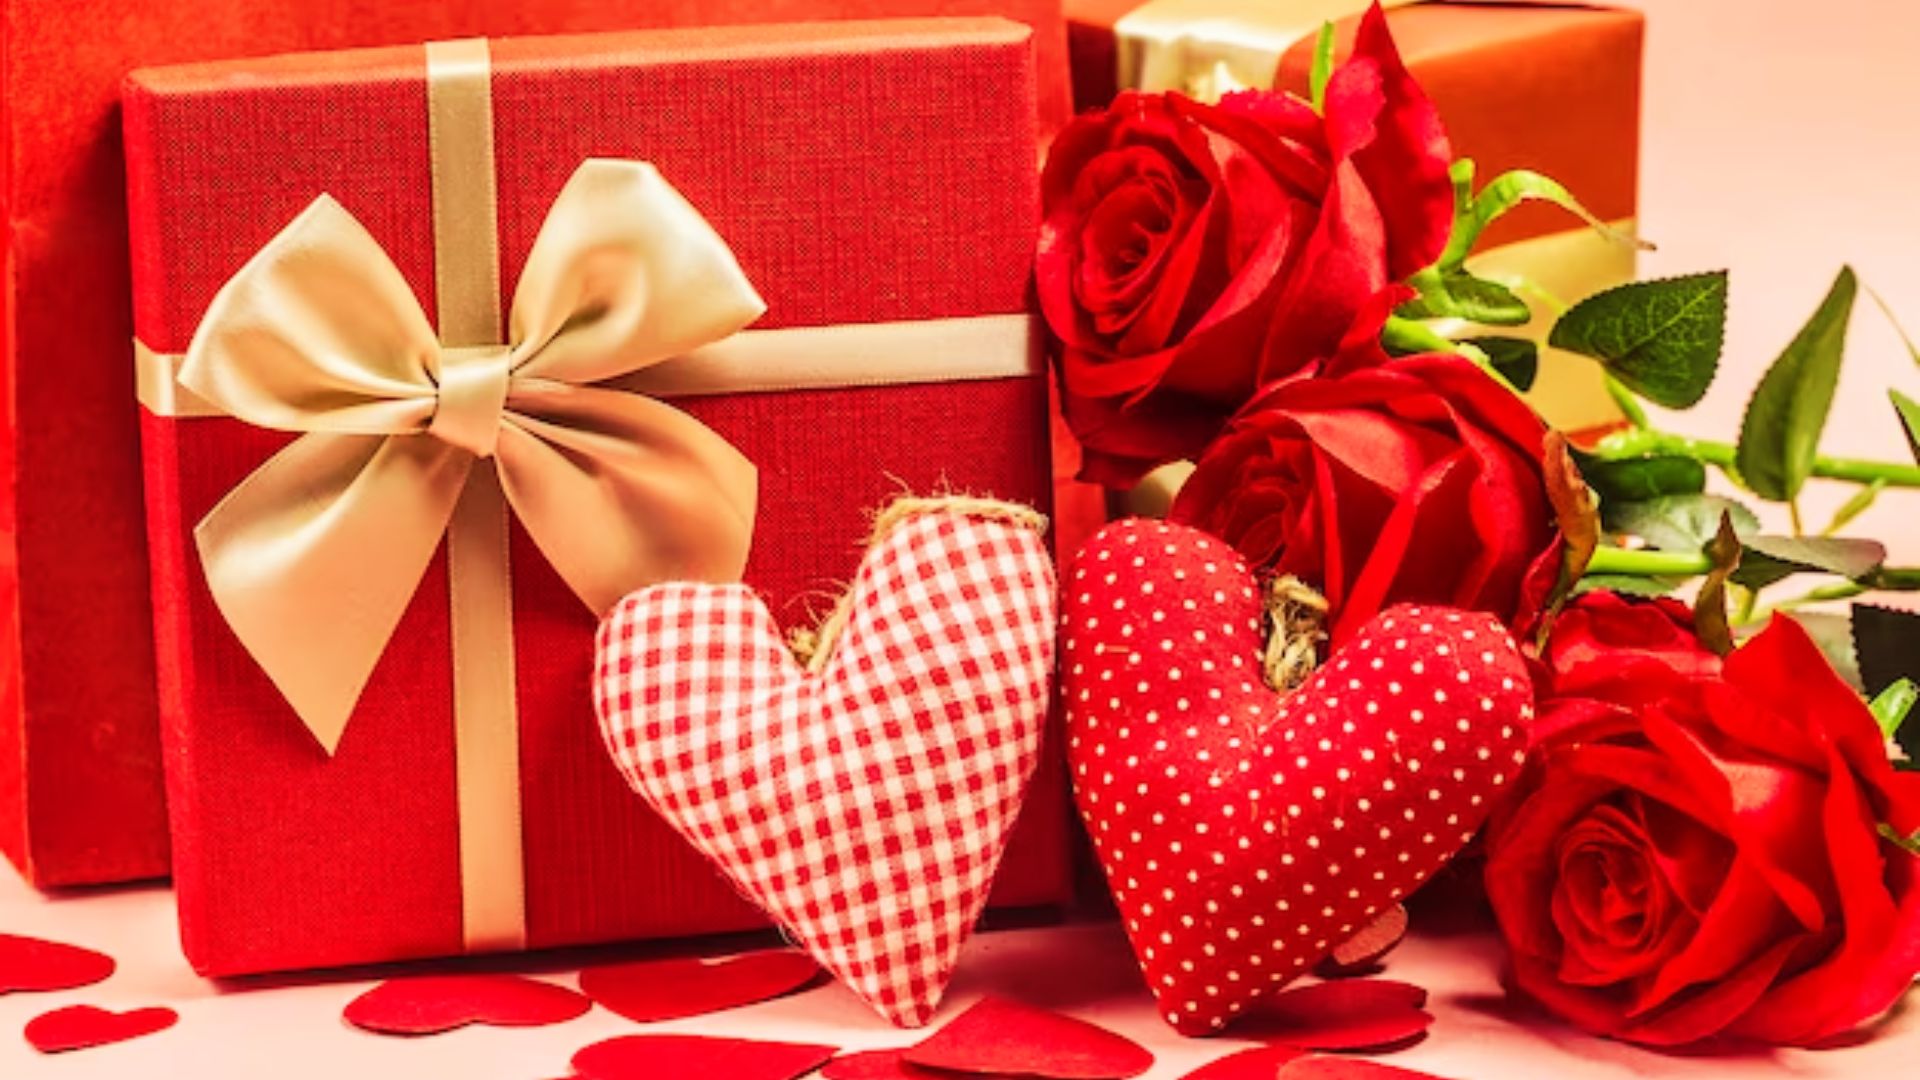 30 Romantic Valentine's Day Gift Ideas For Both Him and Her |